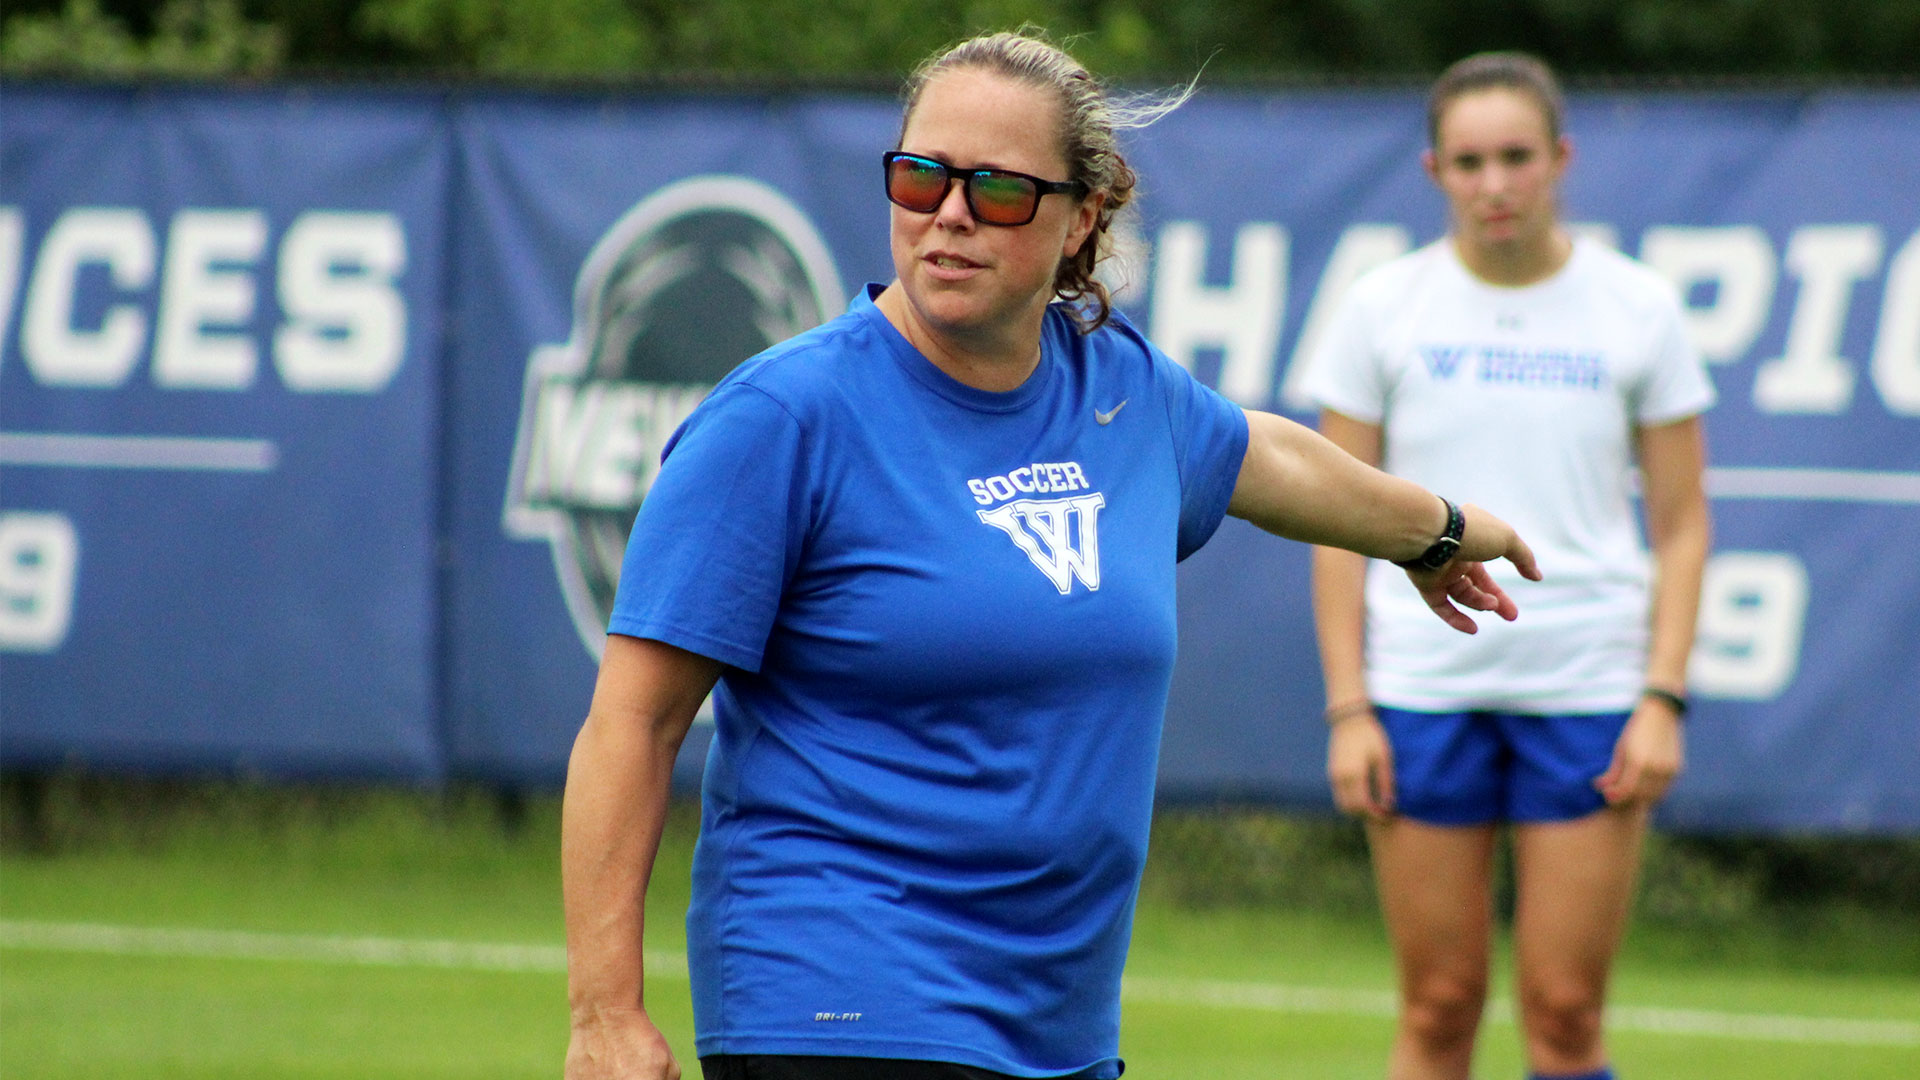 women's soccer coach in blue shirt on grass field directing players